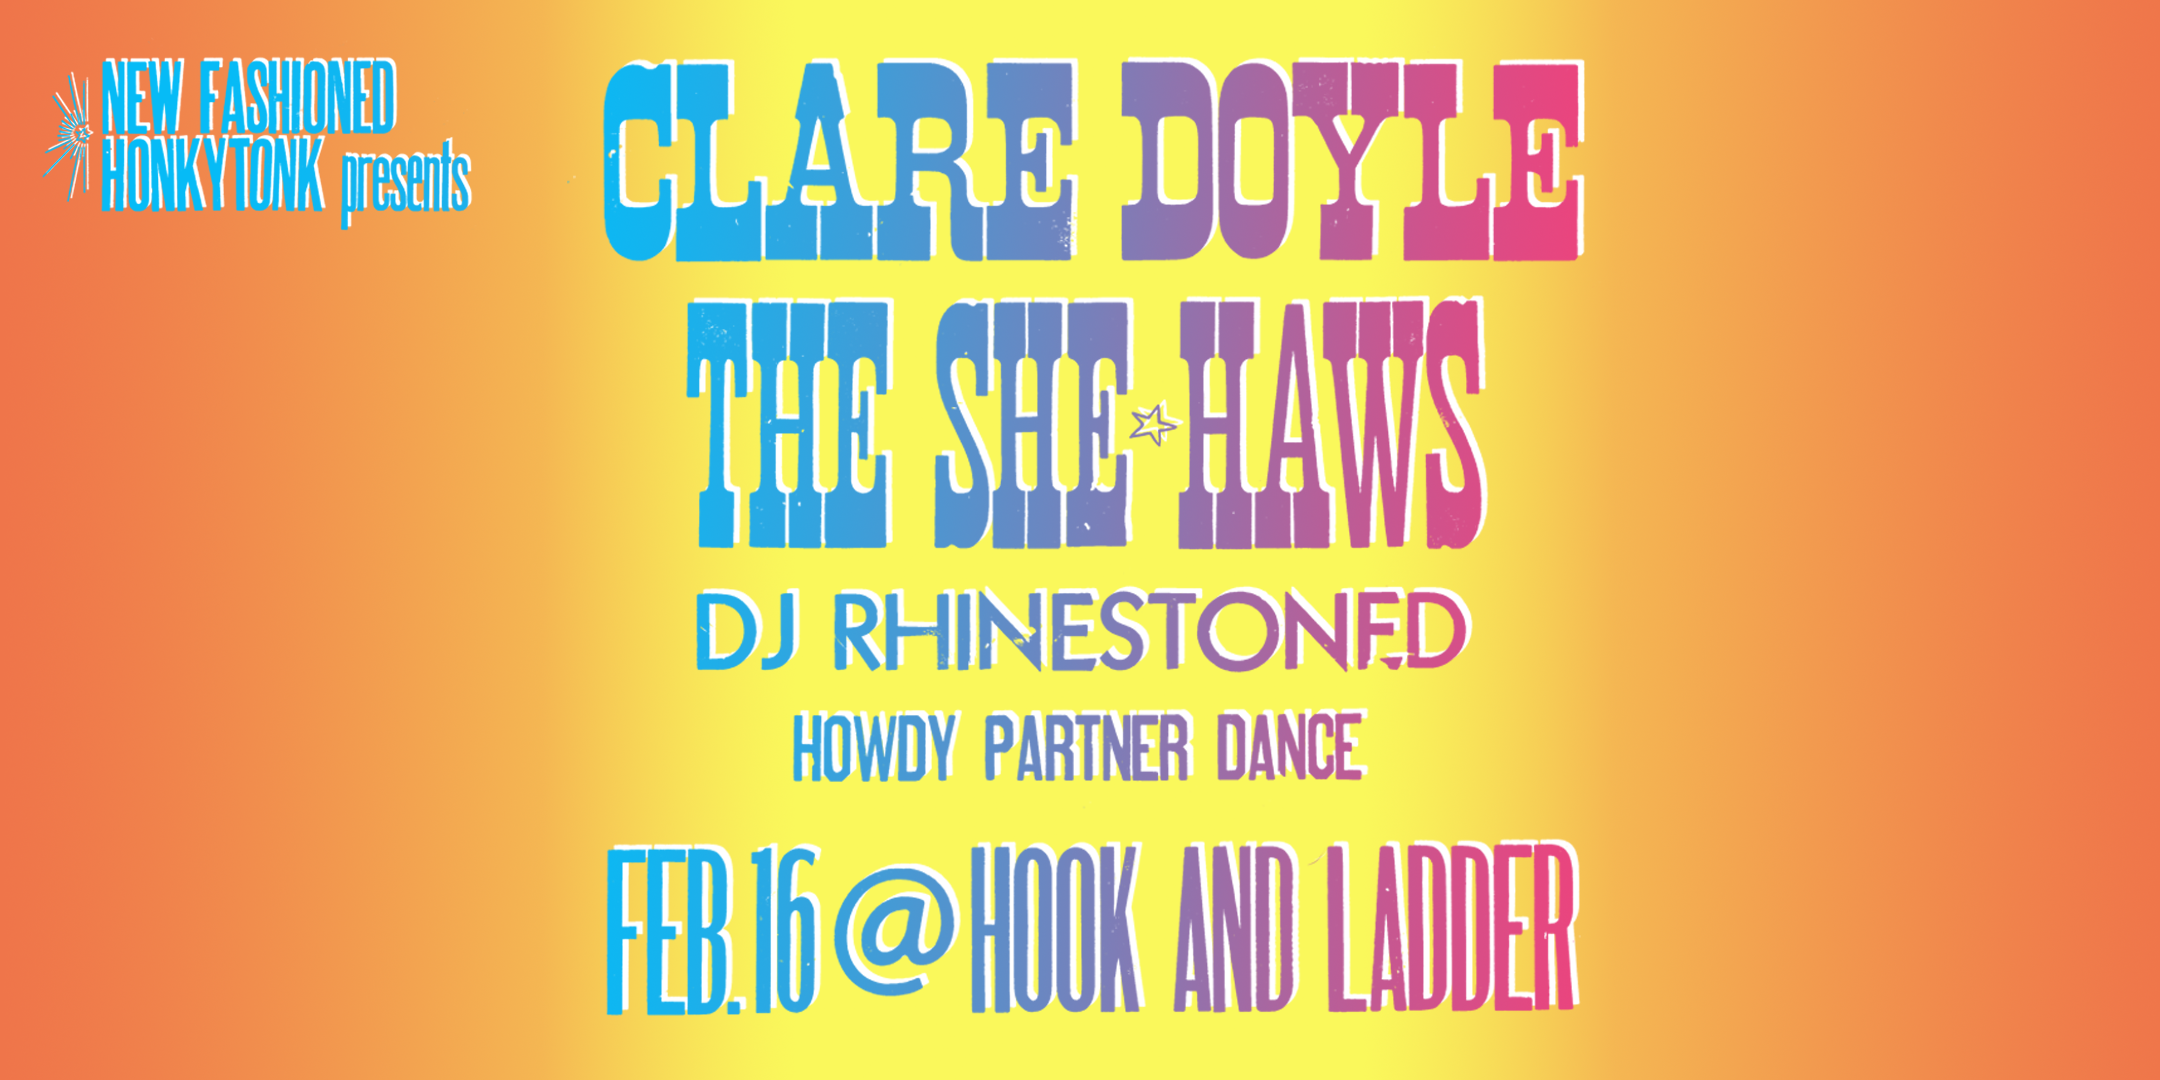 New Fashioned HonkyTonk Presents: Clare Doyle The She Haws DJ Rhinestoned Howdy Partner Dance Friday, February 16 The Hook and Ladder Theater Doors 7:00pm :: Music 8:00pm :: 21+ $15 ADV / $20 DOS Tickets On-Sale Now